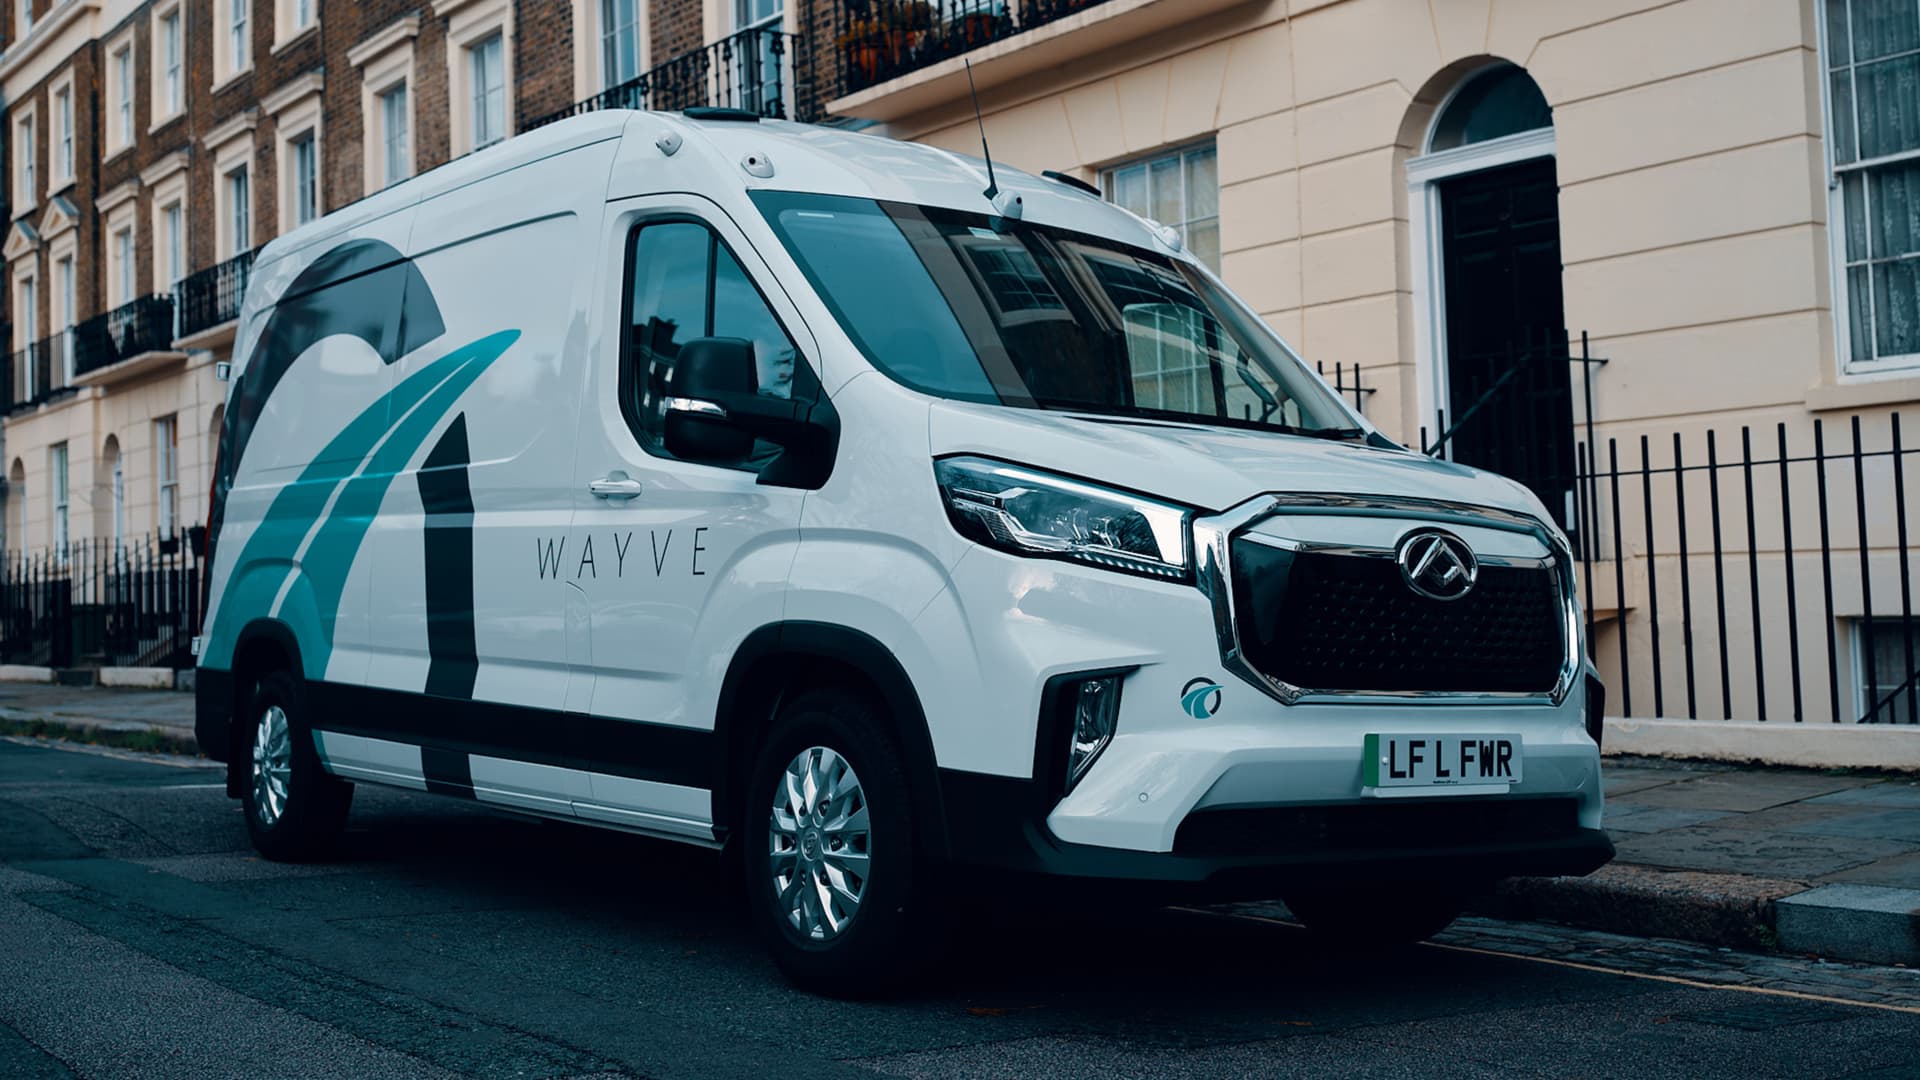 A delivery van outfitted with Wayve's autonomous driving software is part of the fleet of vehicles making grocery deliveries across London.